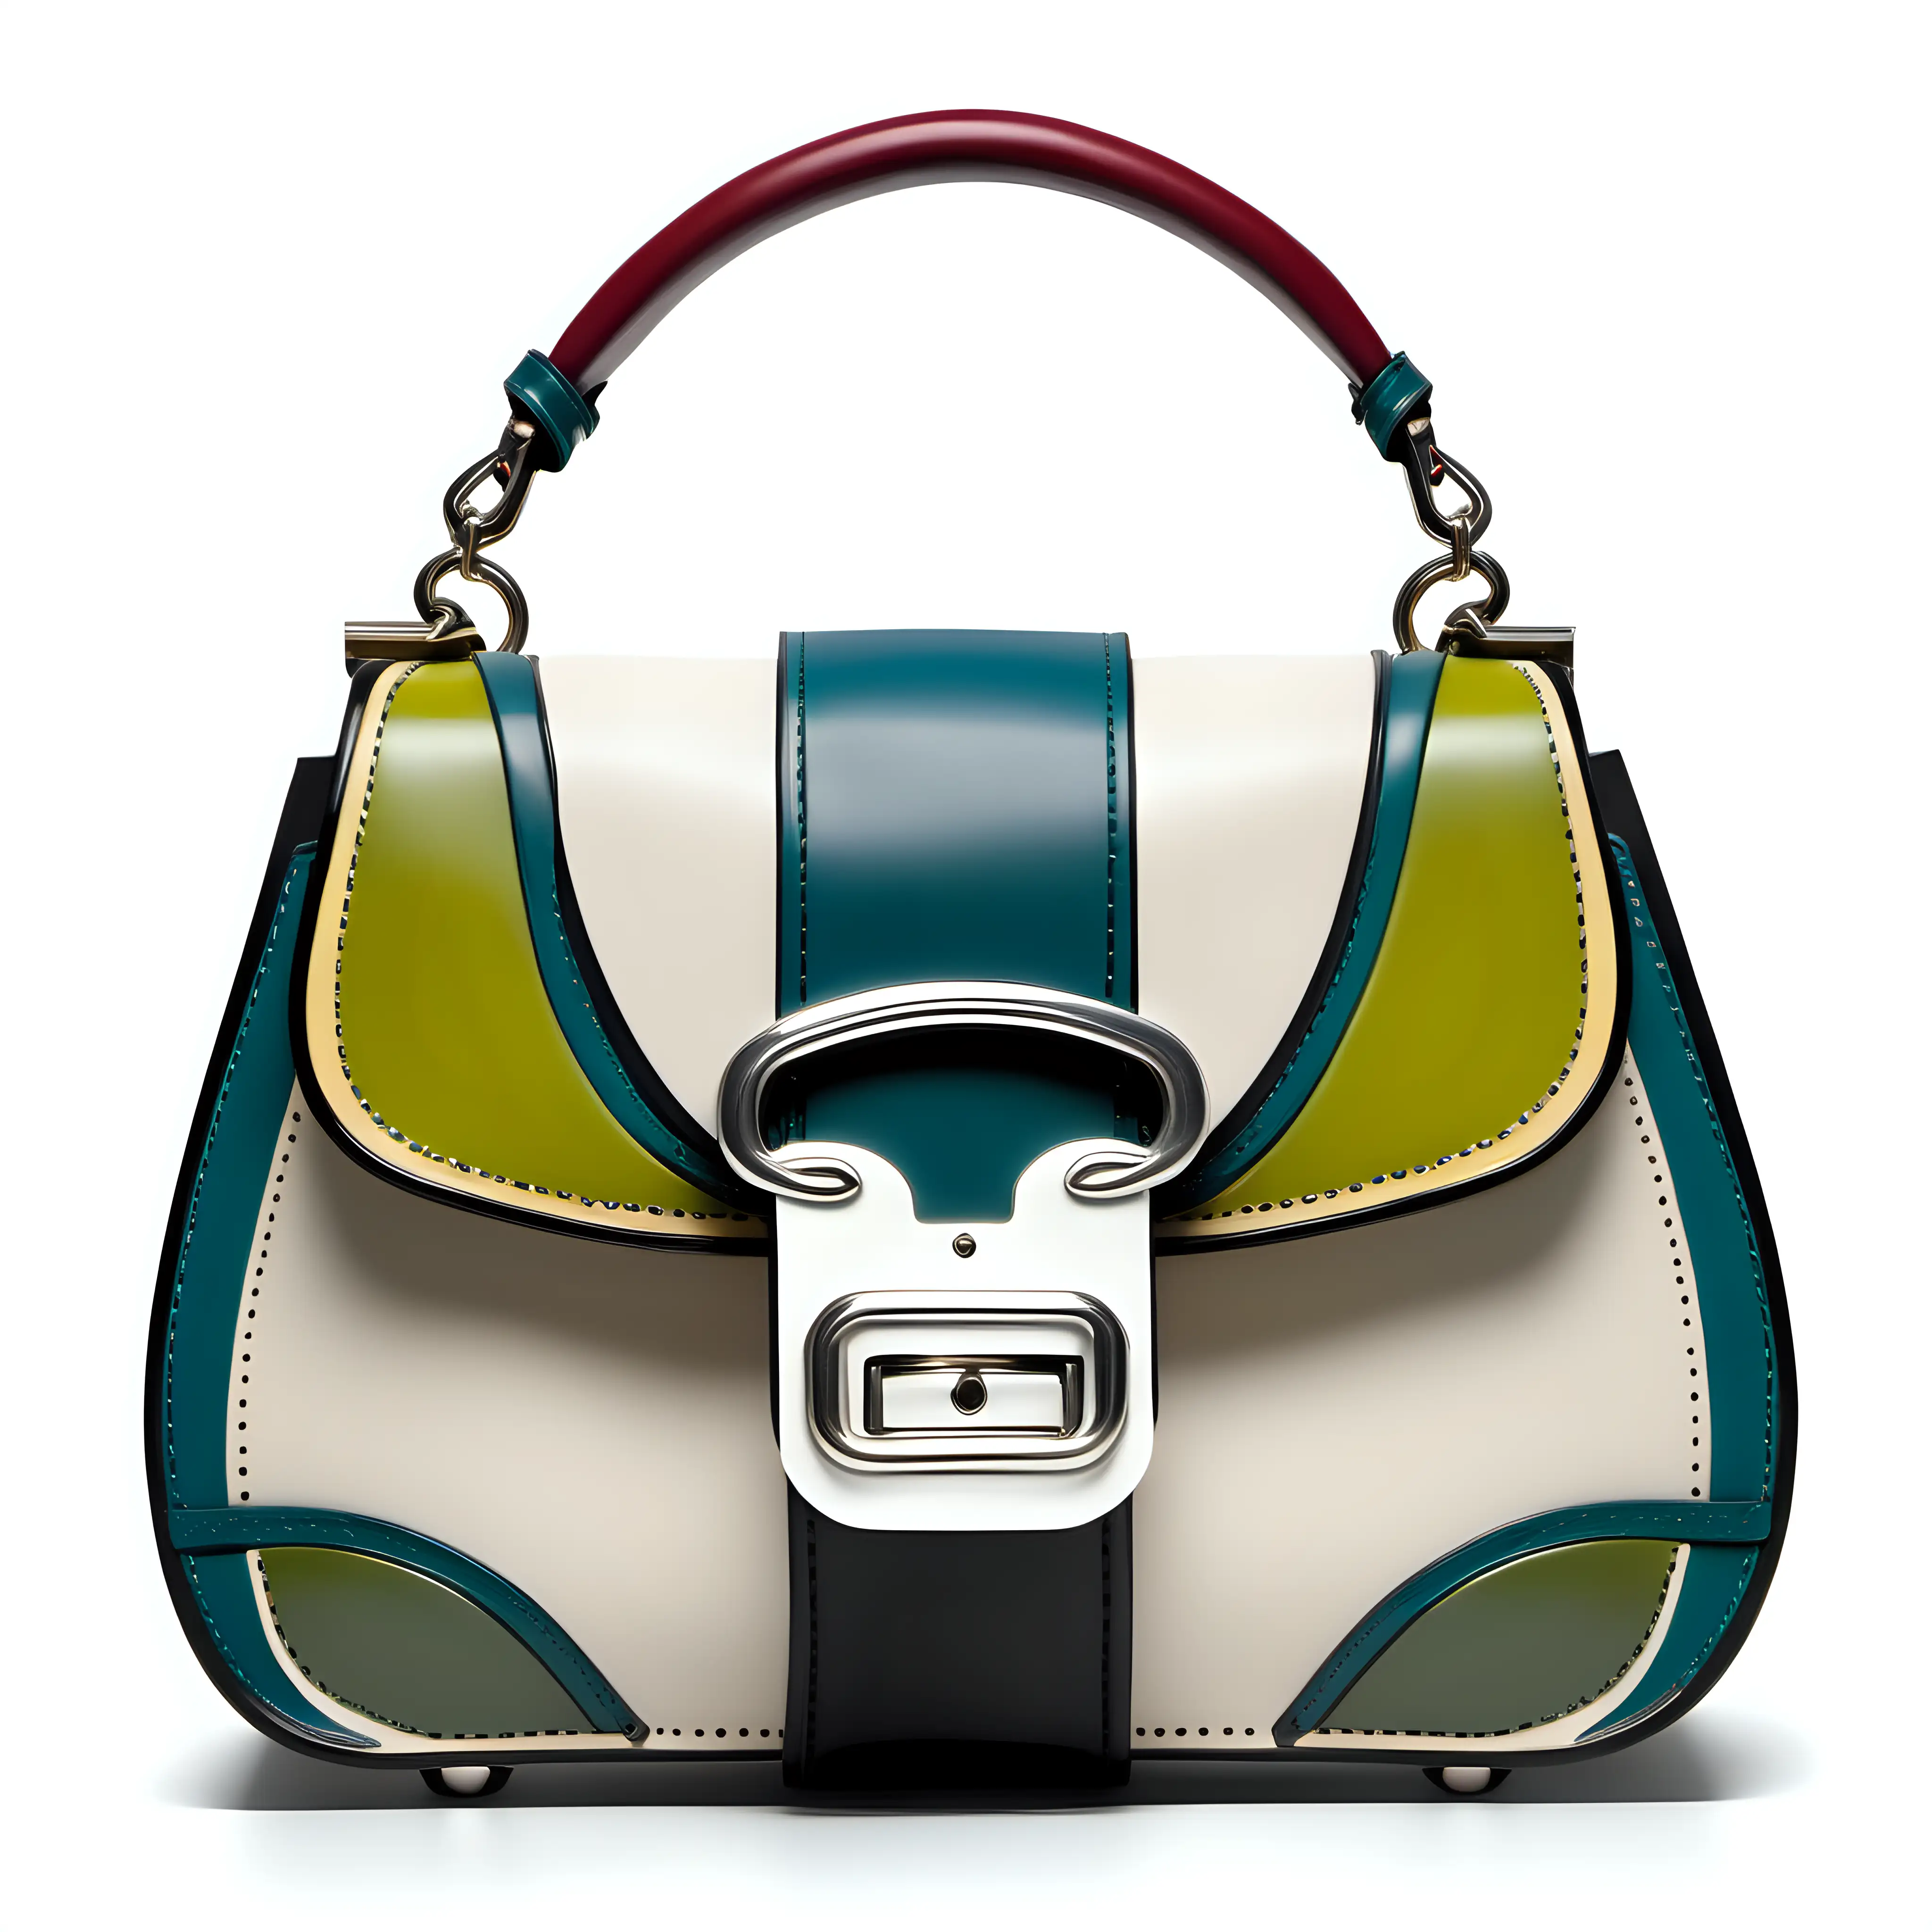 Art Nouveau Inspired Luxury Leather Bag with Color Block Inserts and Metal Buckle